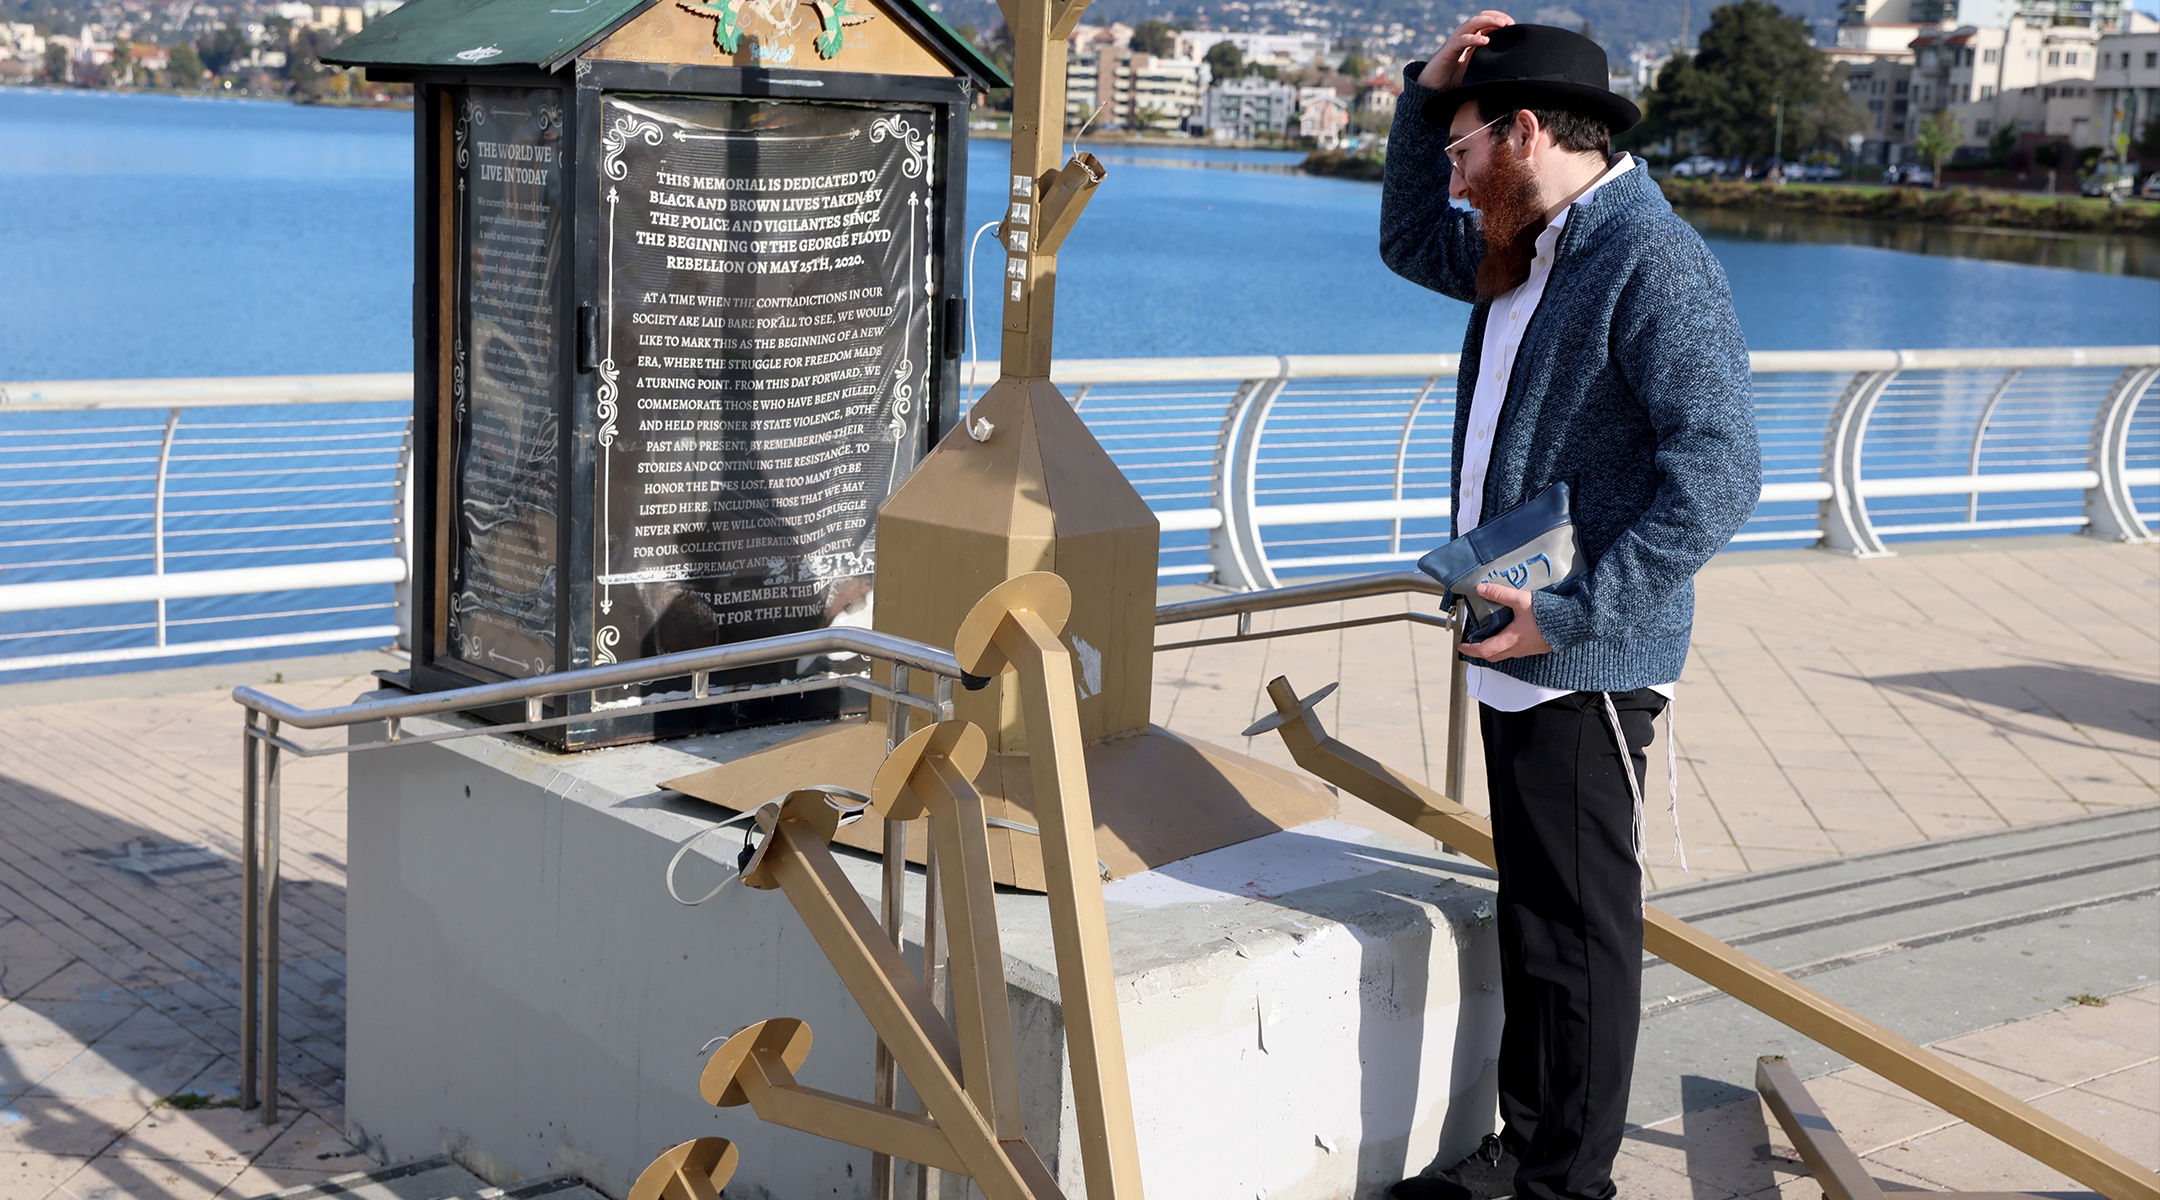 Moshe Turk of the Chabad Jewish Center of Oakland looks at a damaged menorah at the Lake Merritt Amphitheater in Oakland, Calif., Dec. 13, 2023. (Jane Tyska/Digital First Media/East Bay Times via Getty Images)